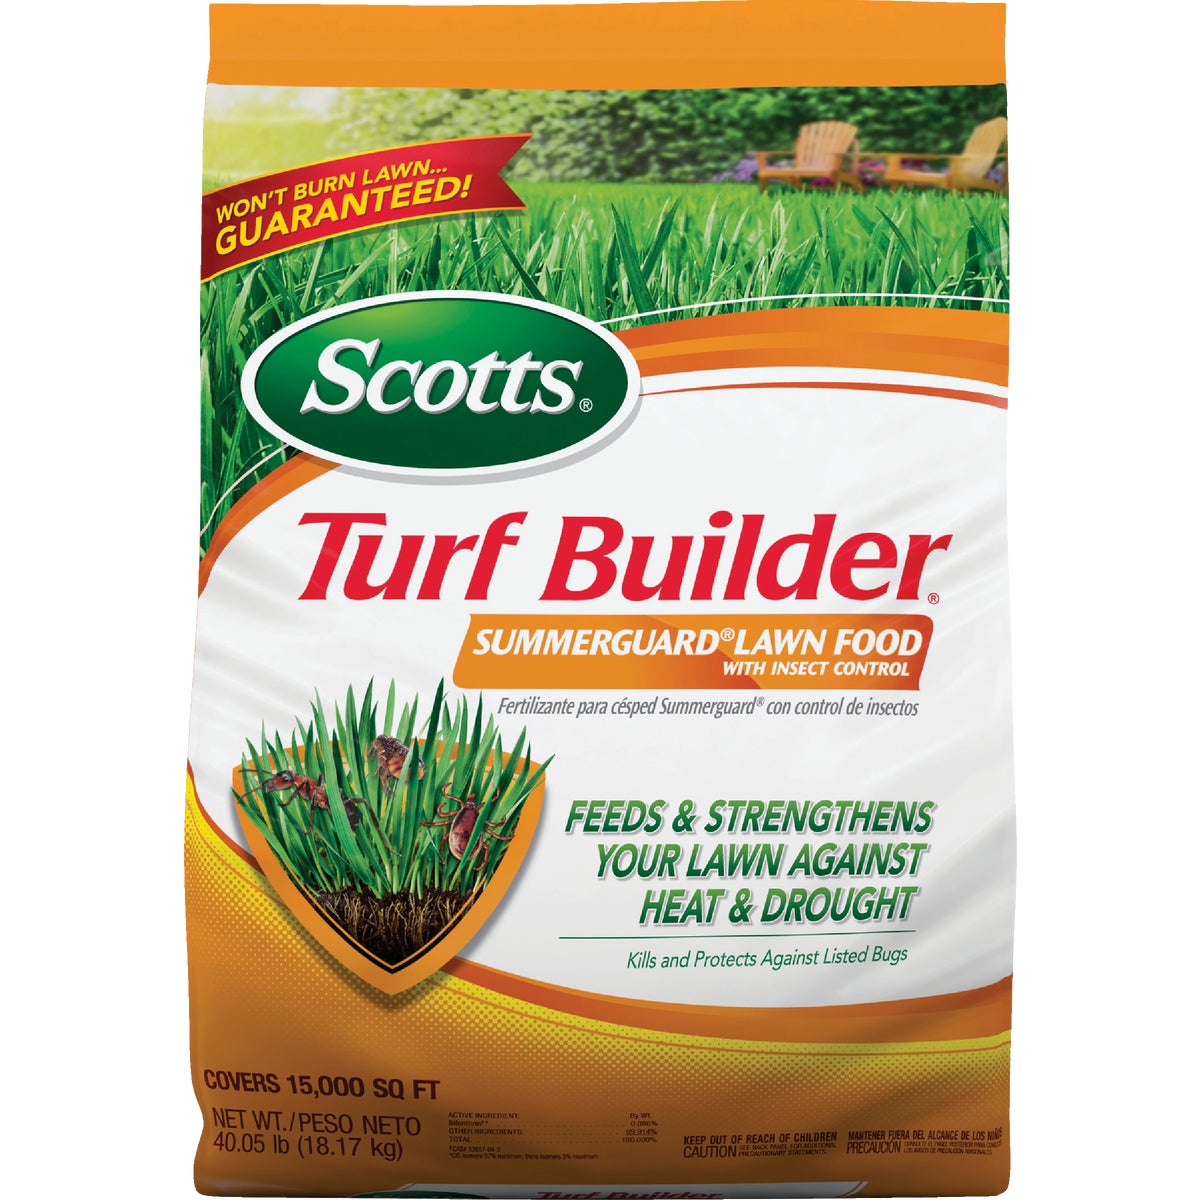 Scotts Turf Builder SummerGuard 40.05 Lb. 15,000 Sq. Ft. Lawn Food with Insect Control